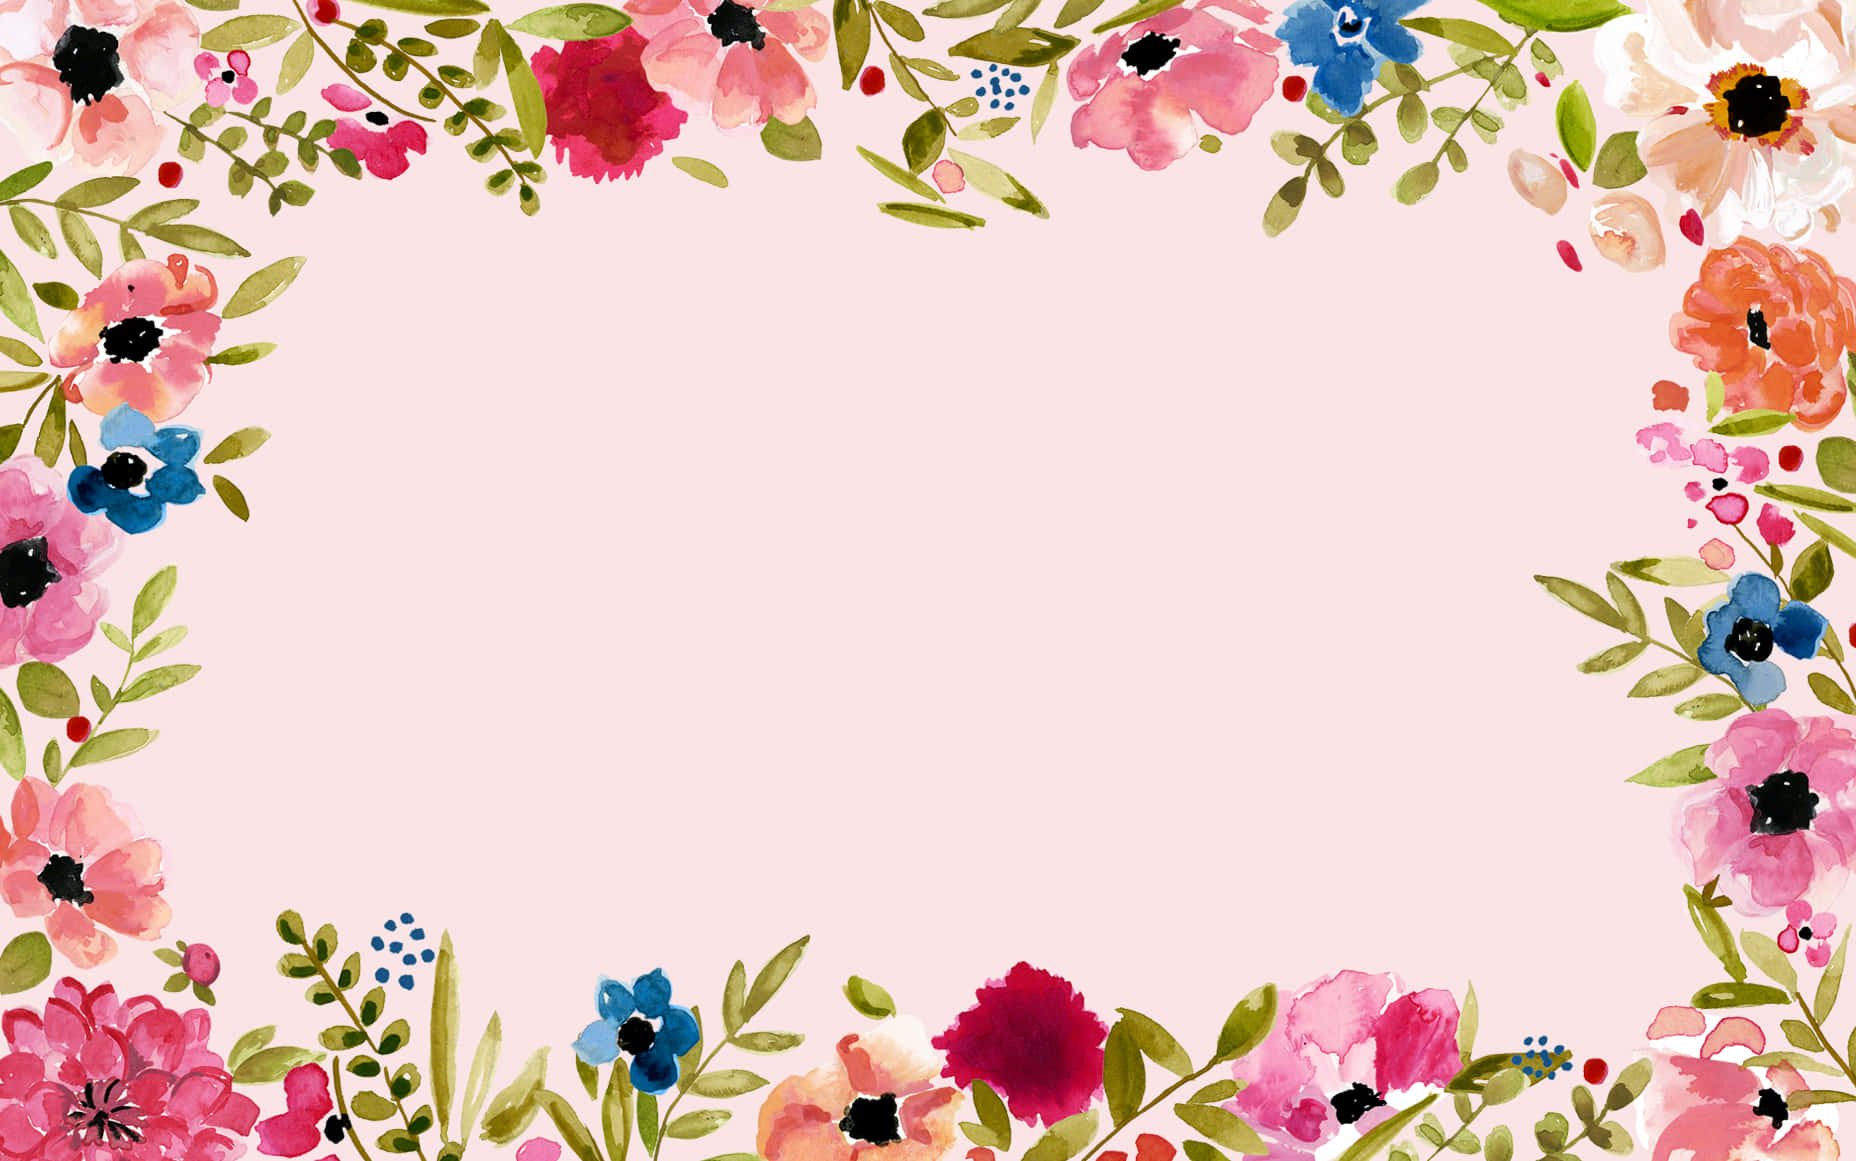 A Pink Floral Frame With Flowers On It